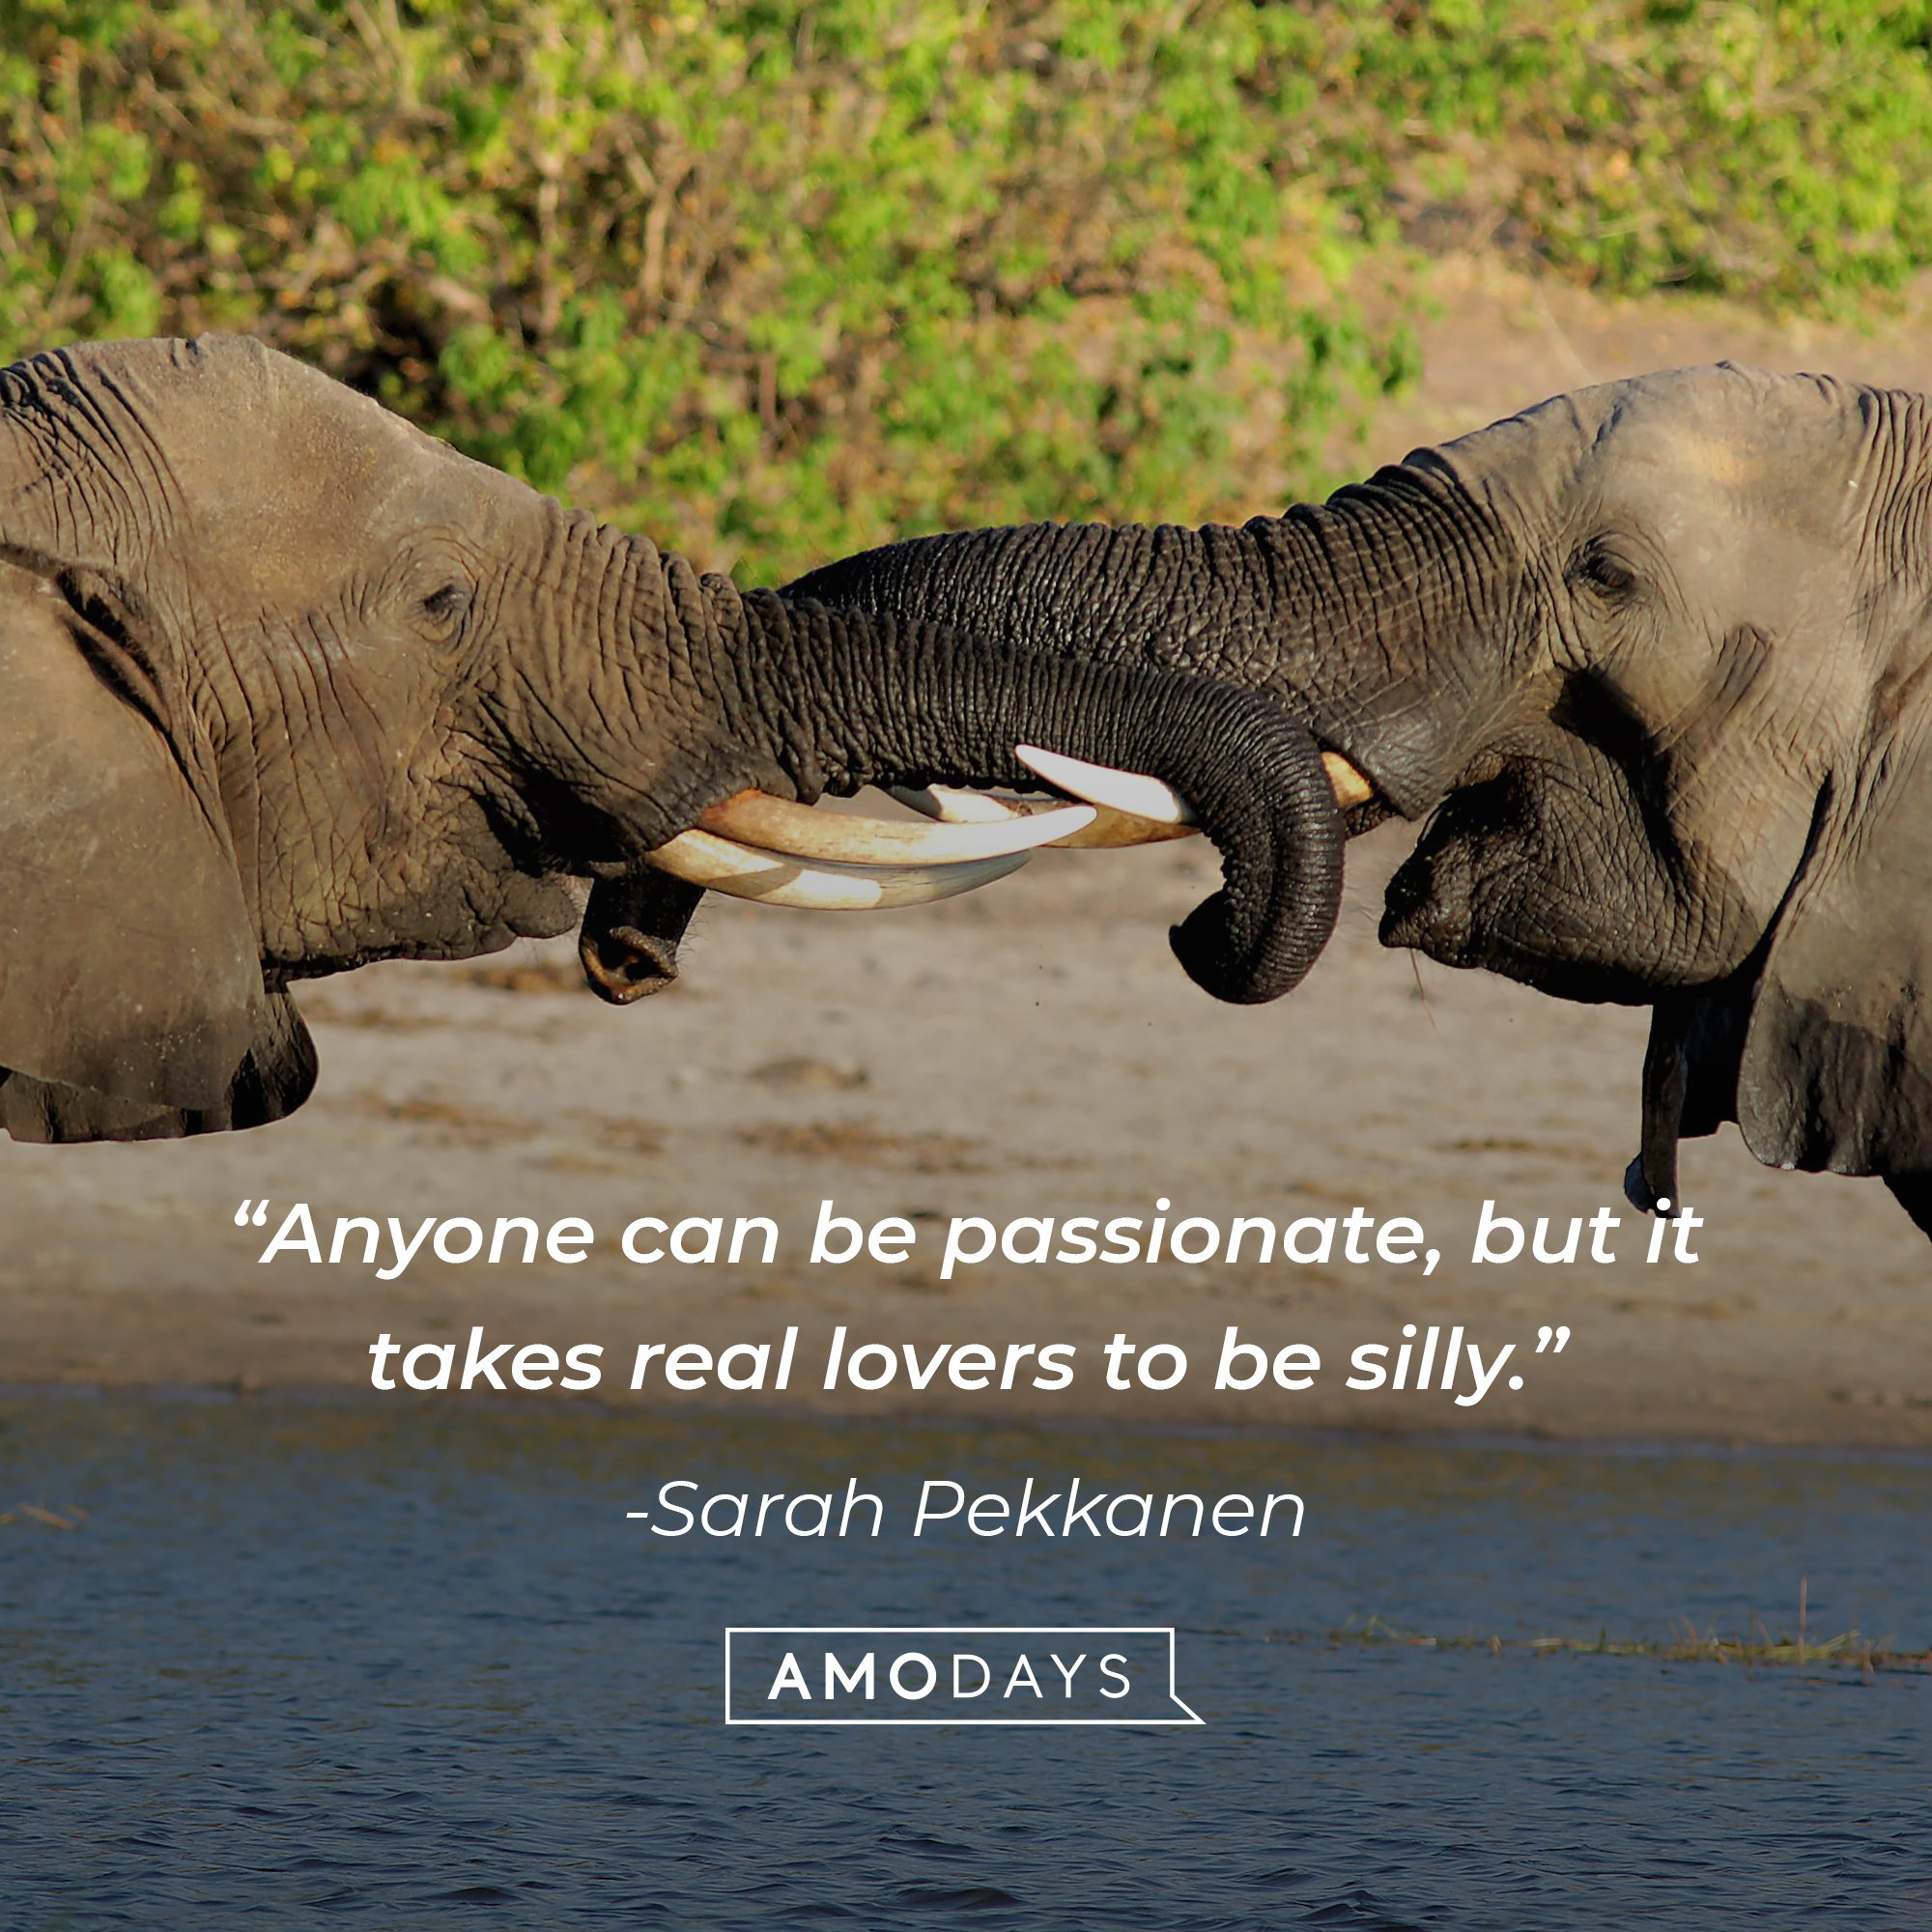 Sarah Pekkanen's quote: “Anyone can be passionate, but it takes real lovers to be silly.” | Image: AmoDays